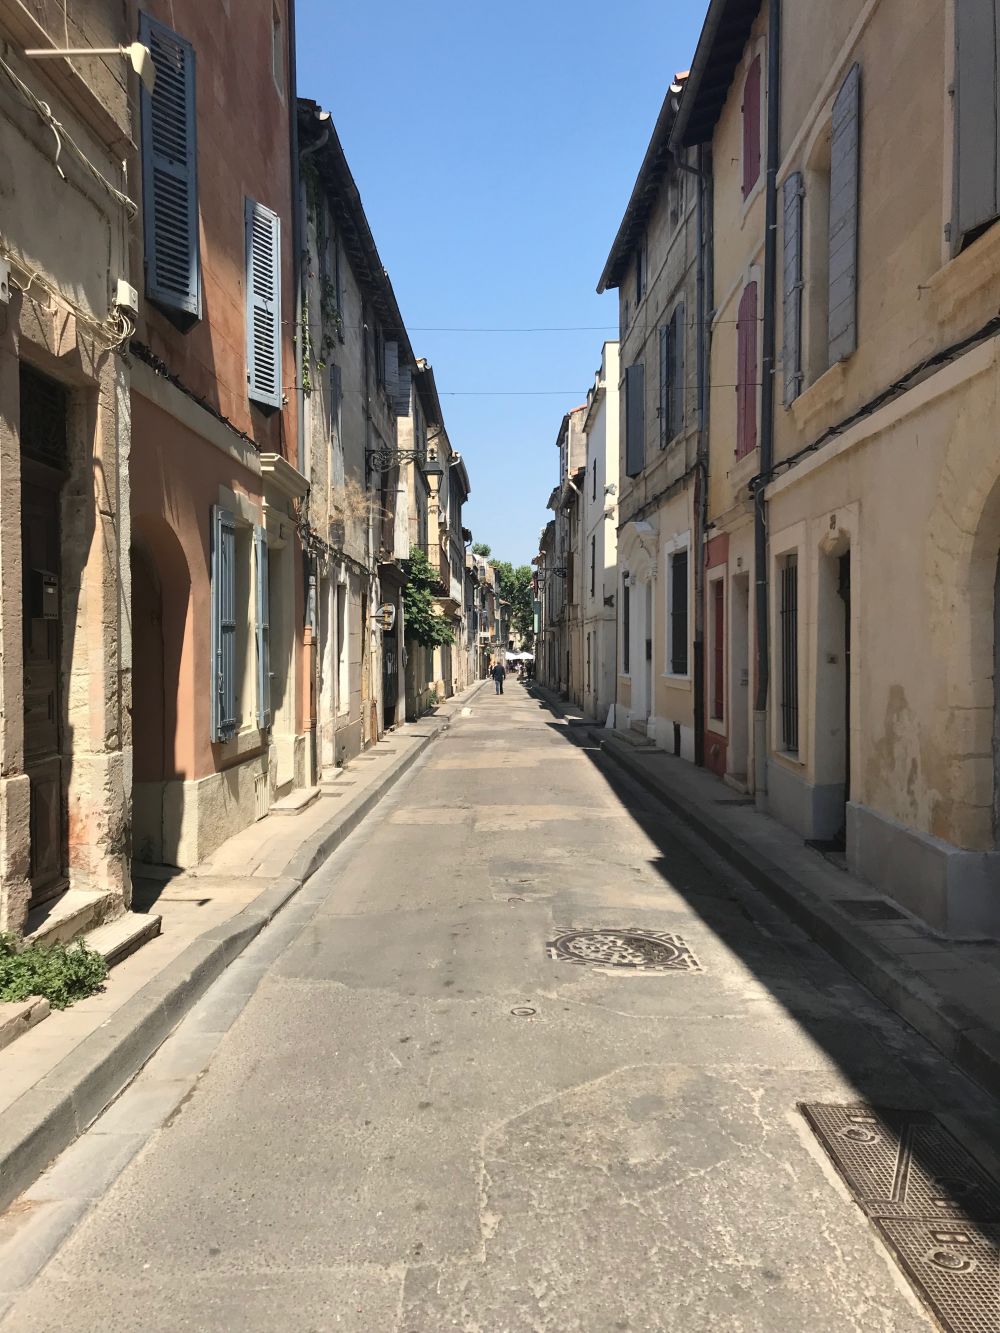 Image of a street in the city of Arles